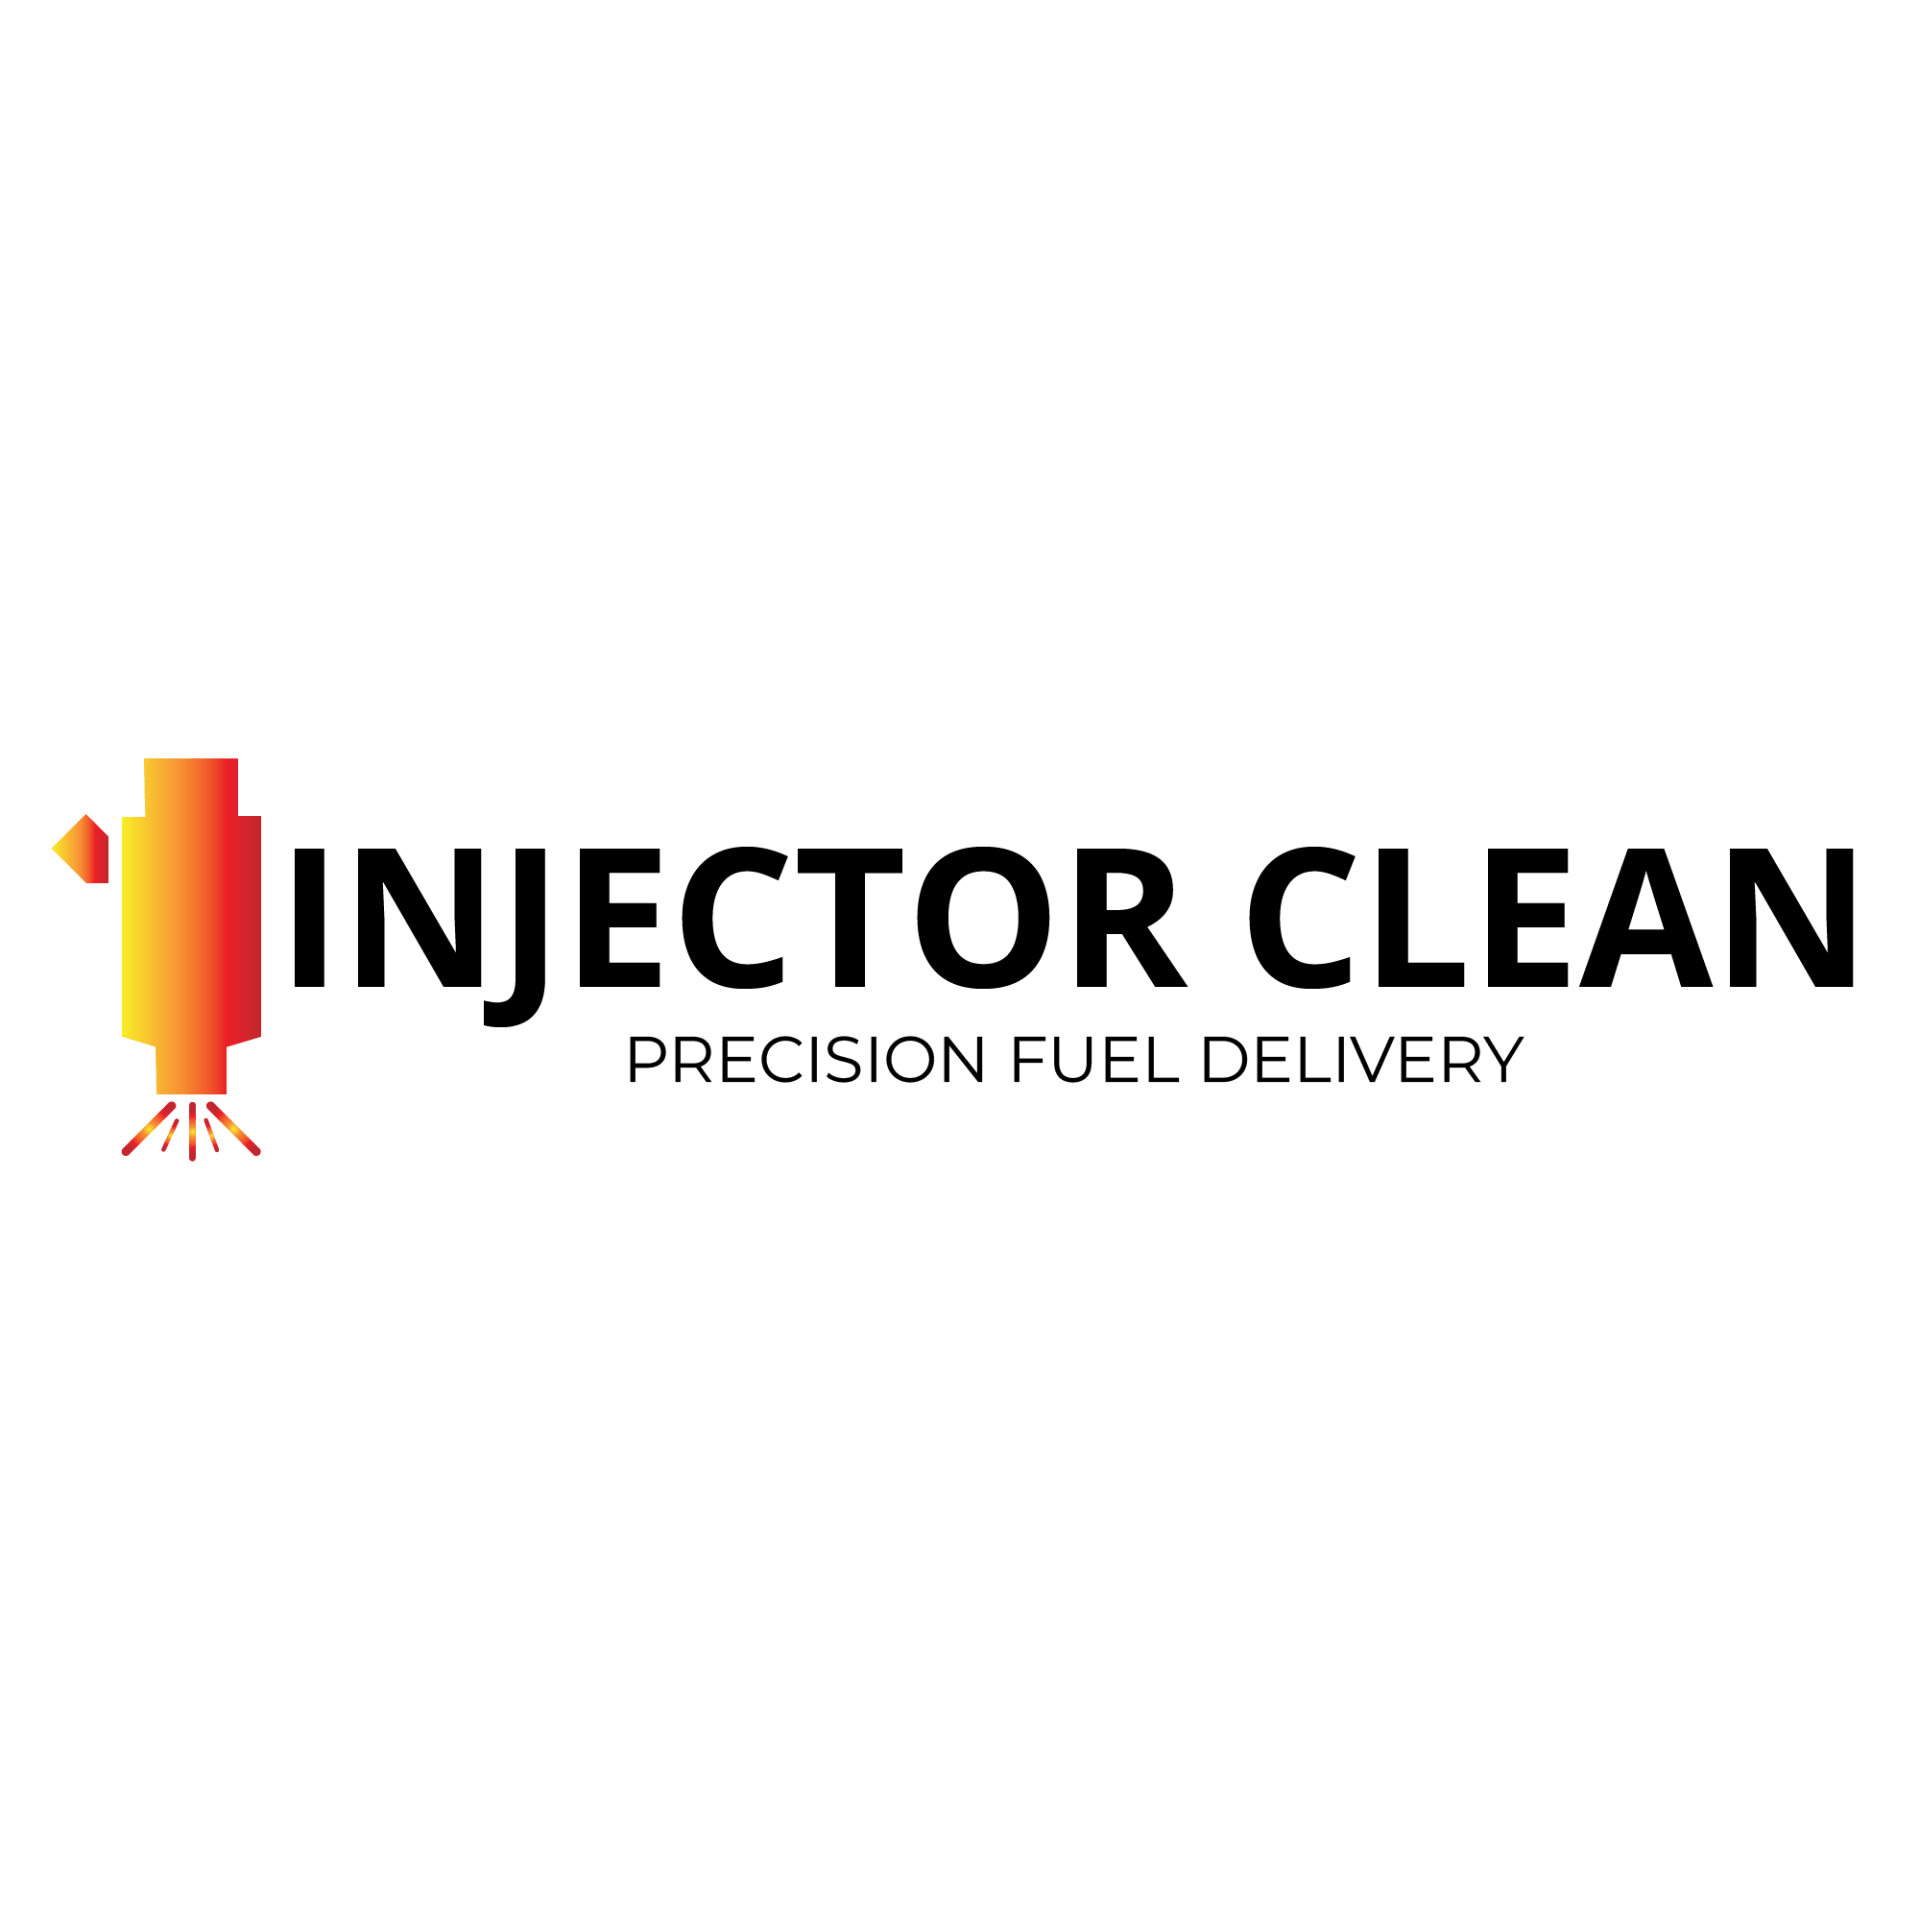 Injector Clean